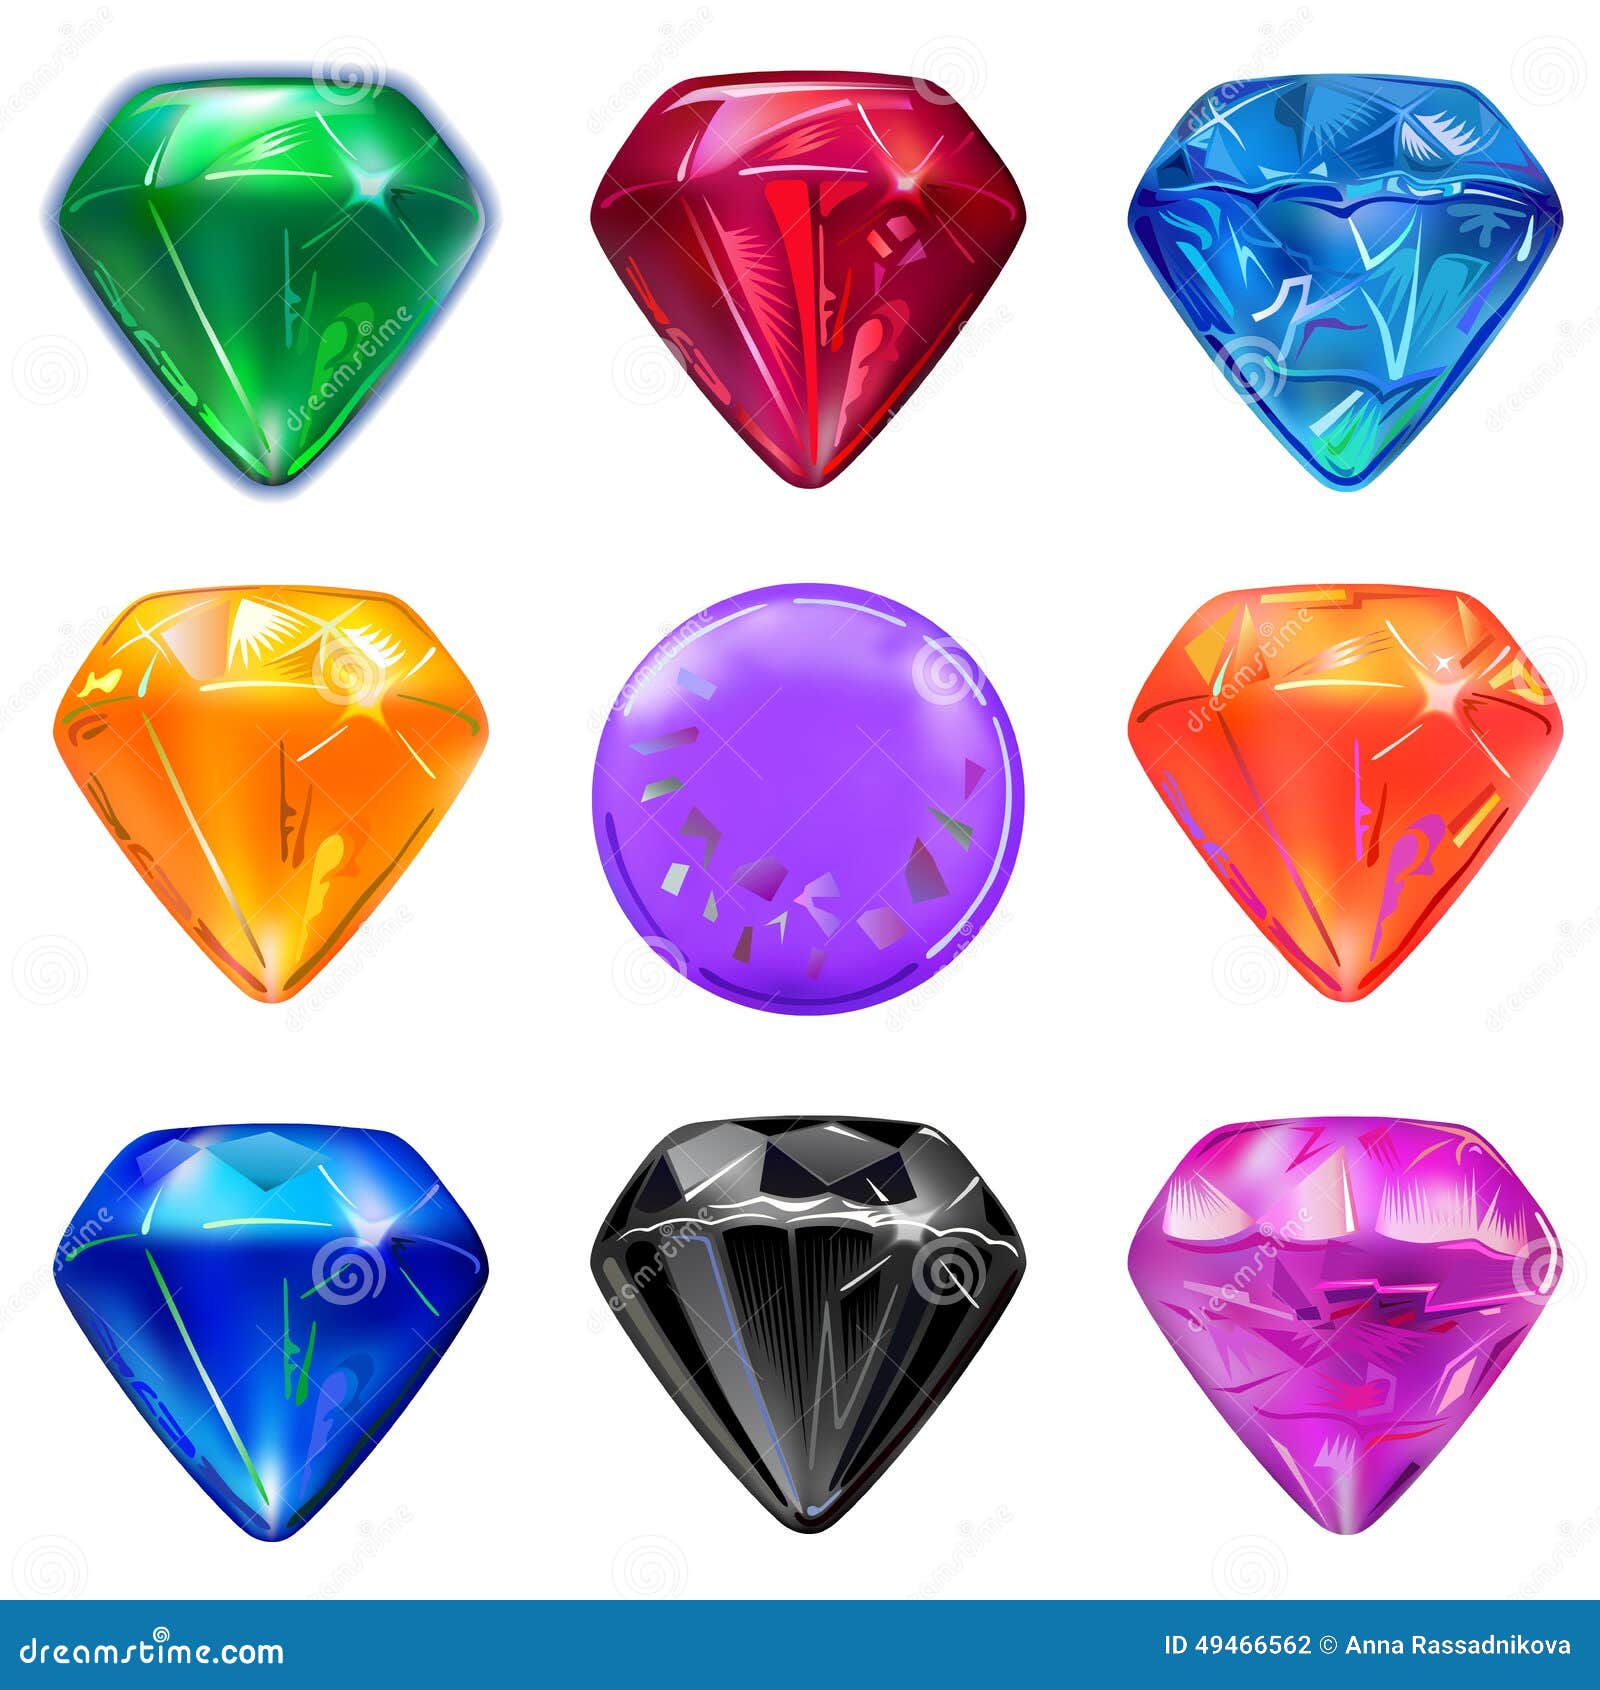 colored gems game interface set